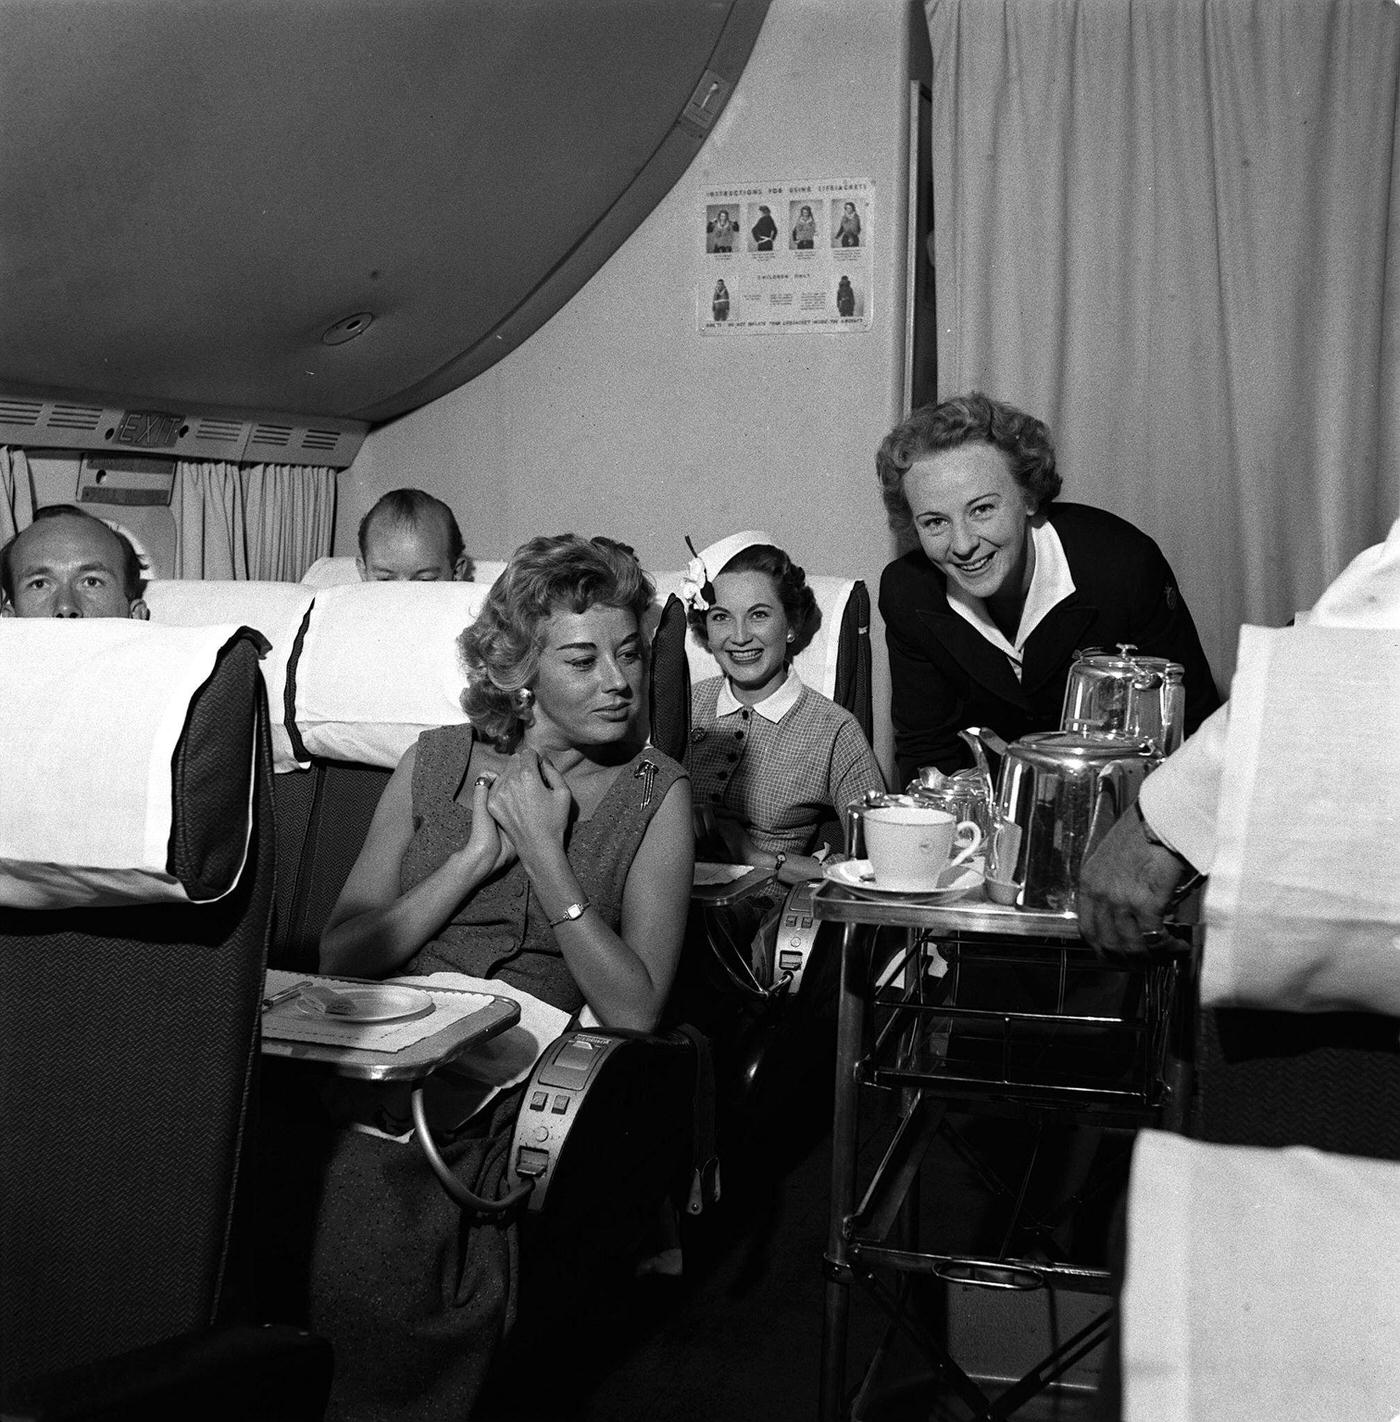 Air hostess Irene Mallory is seen serving food to passengers on her trolley in 1955.